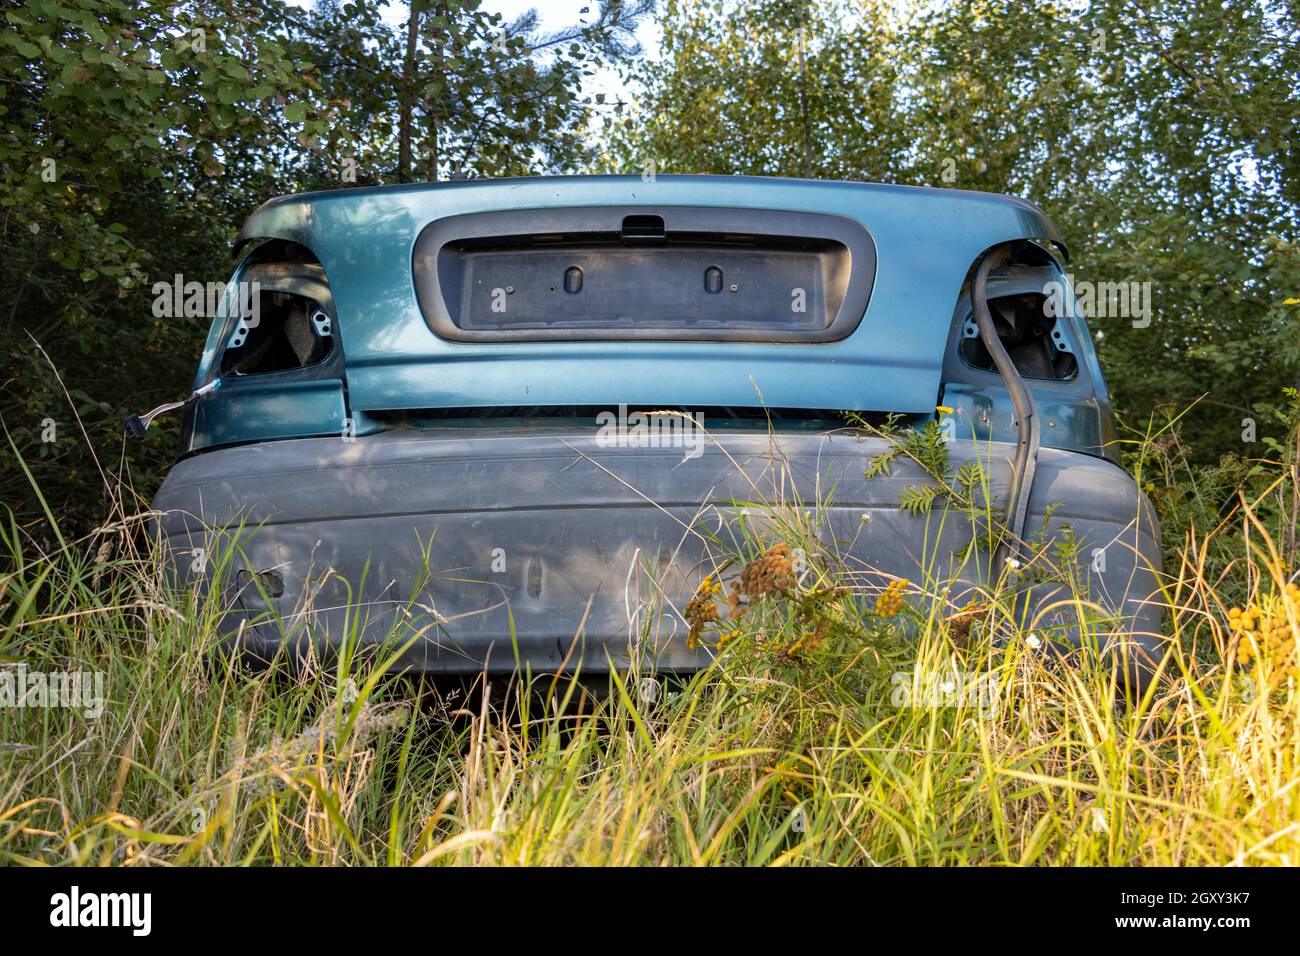 The back of a damaged car parked in nature Stock Photo